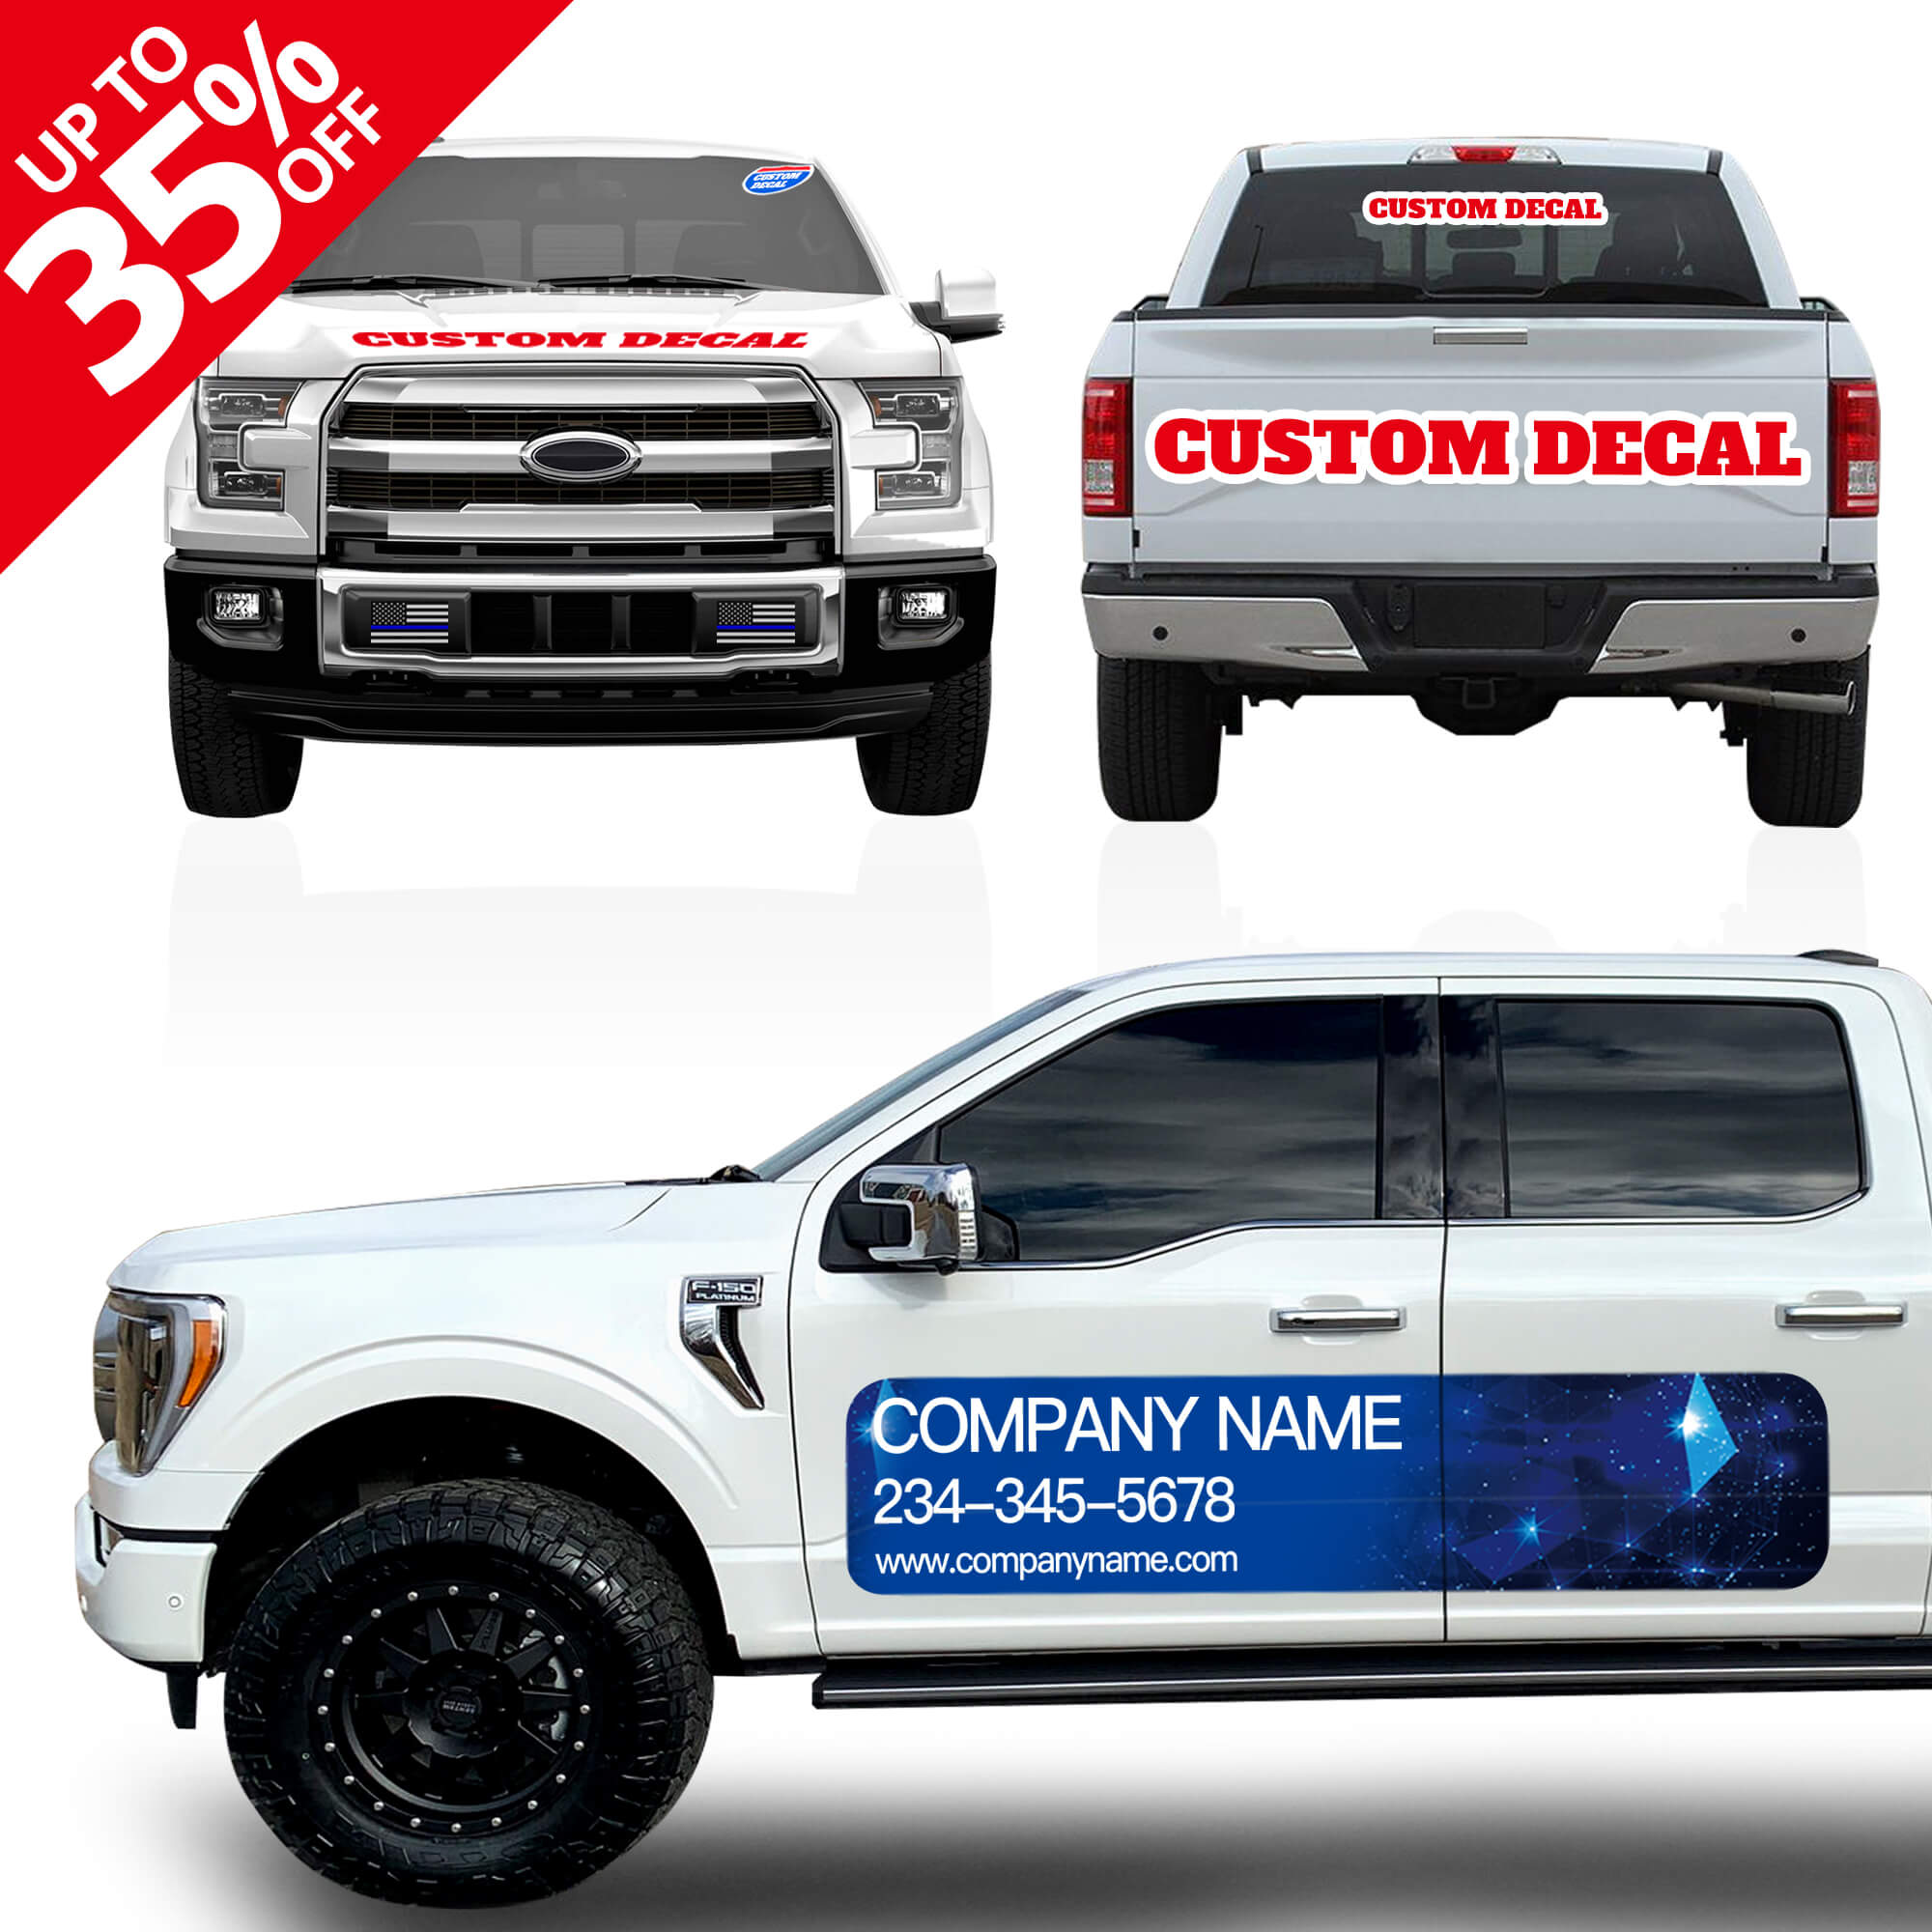 Die-Cut Decals, Die-Cut Stickers for Storefronts & Cars